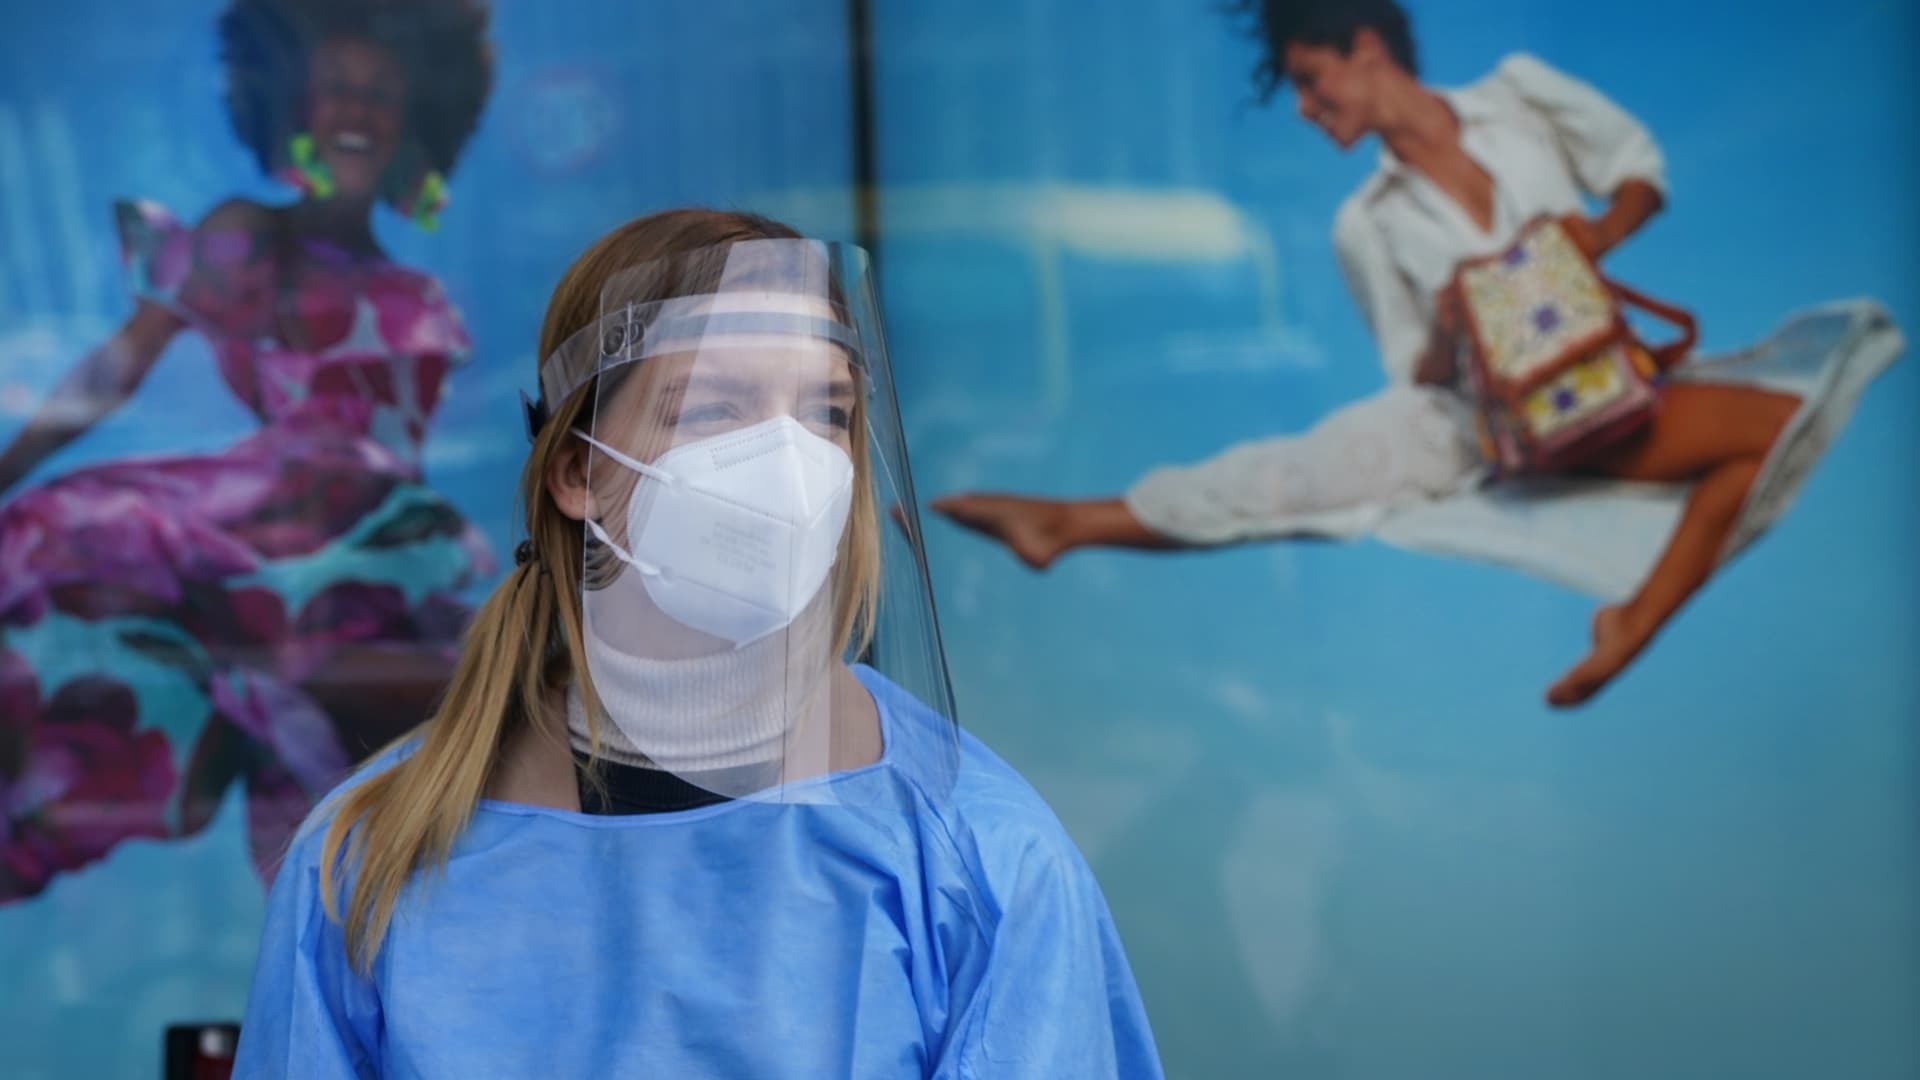 A medical worker attends the opening of a Covid testing station on April 19, 2021 in Berlin, Germany.